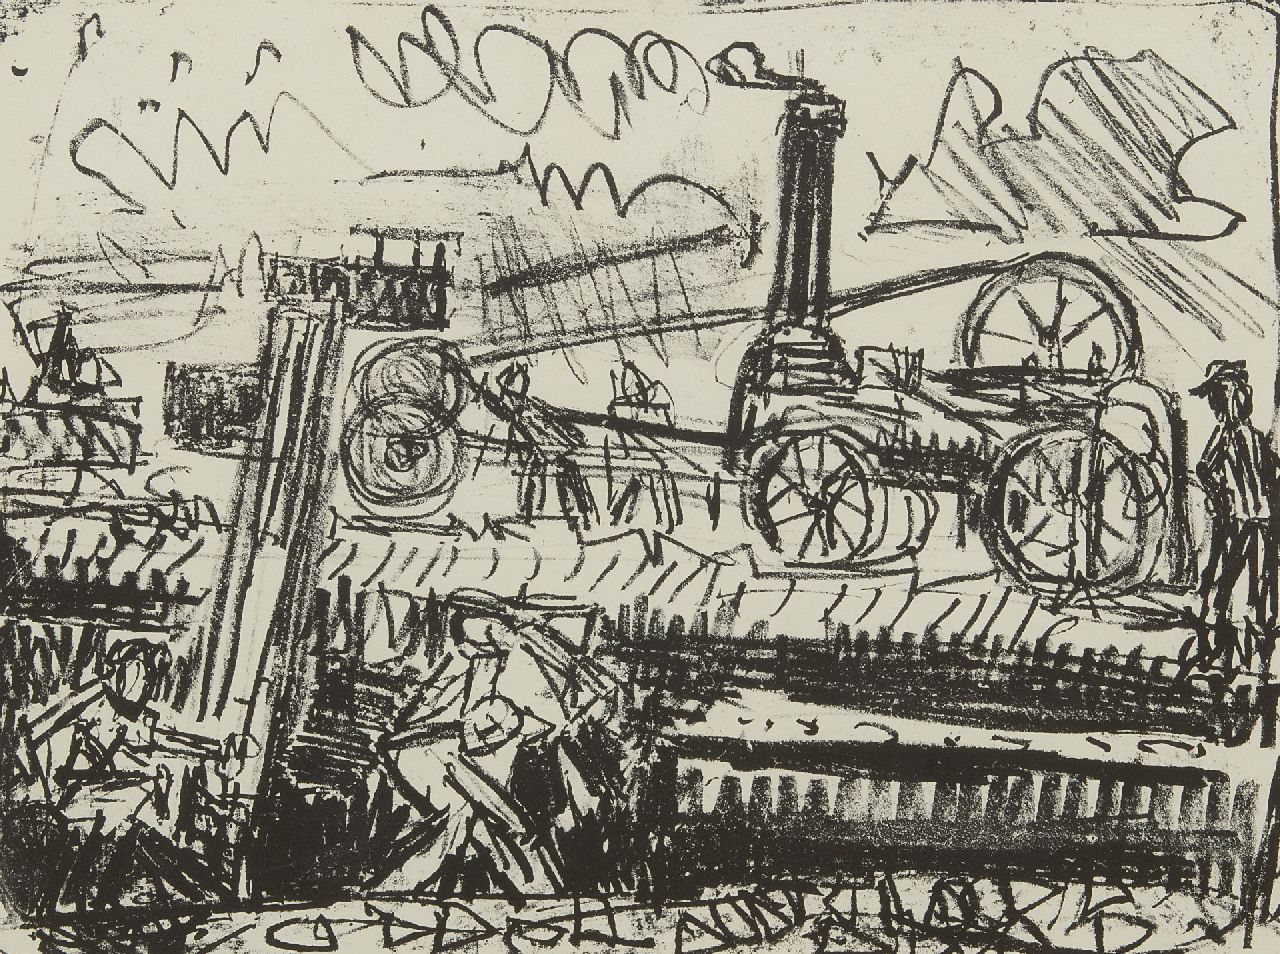 Zee J. van der | Jan van der Zee | Prints and Multiples offered for sale | Harvest machines, lithograph on paper 37.0 x 47.3 cm, signed l.r. (in pencil) and dated (in pencil) '53